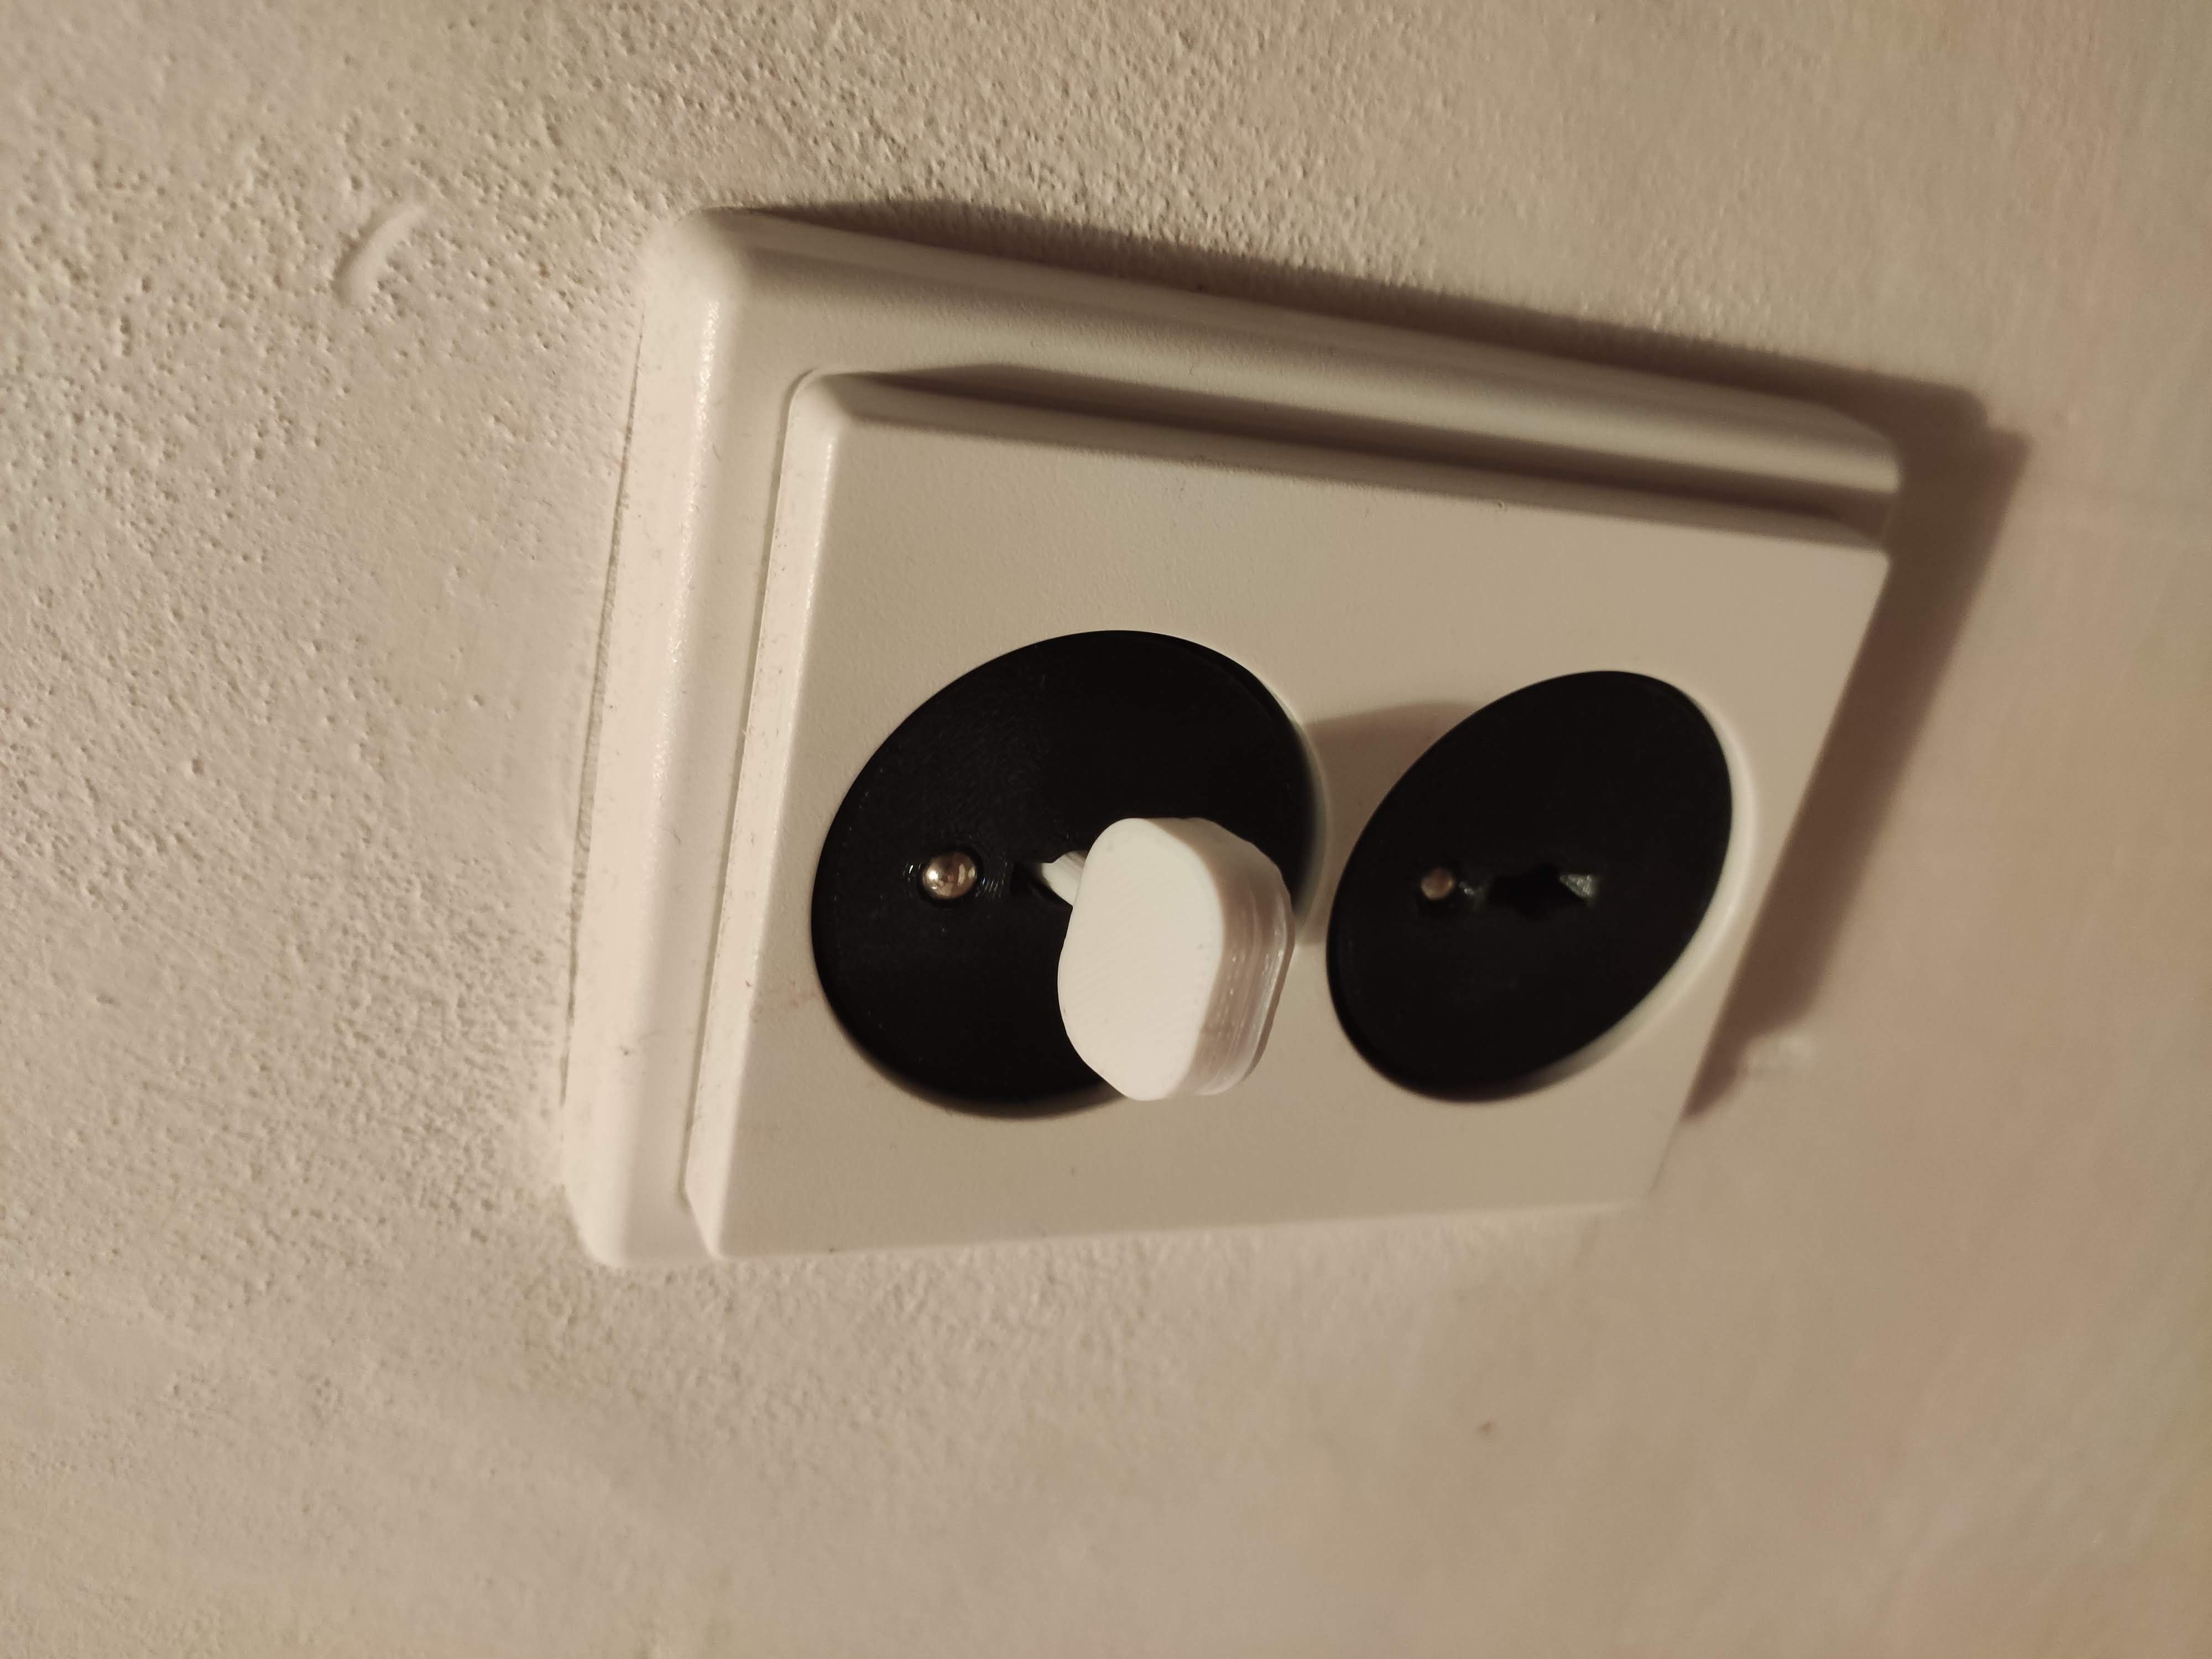 Sockets Cover Baby Protection Against Electric Shock